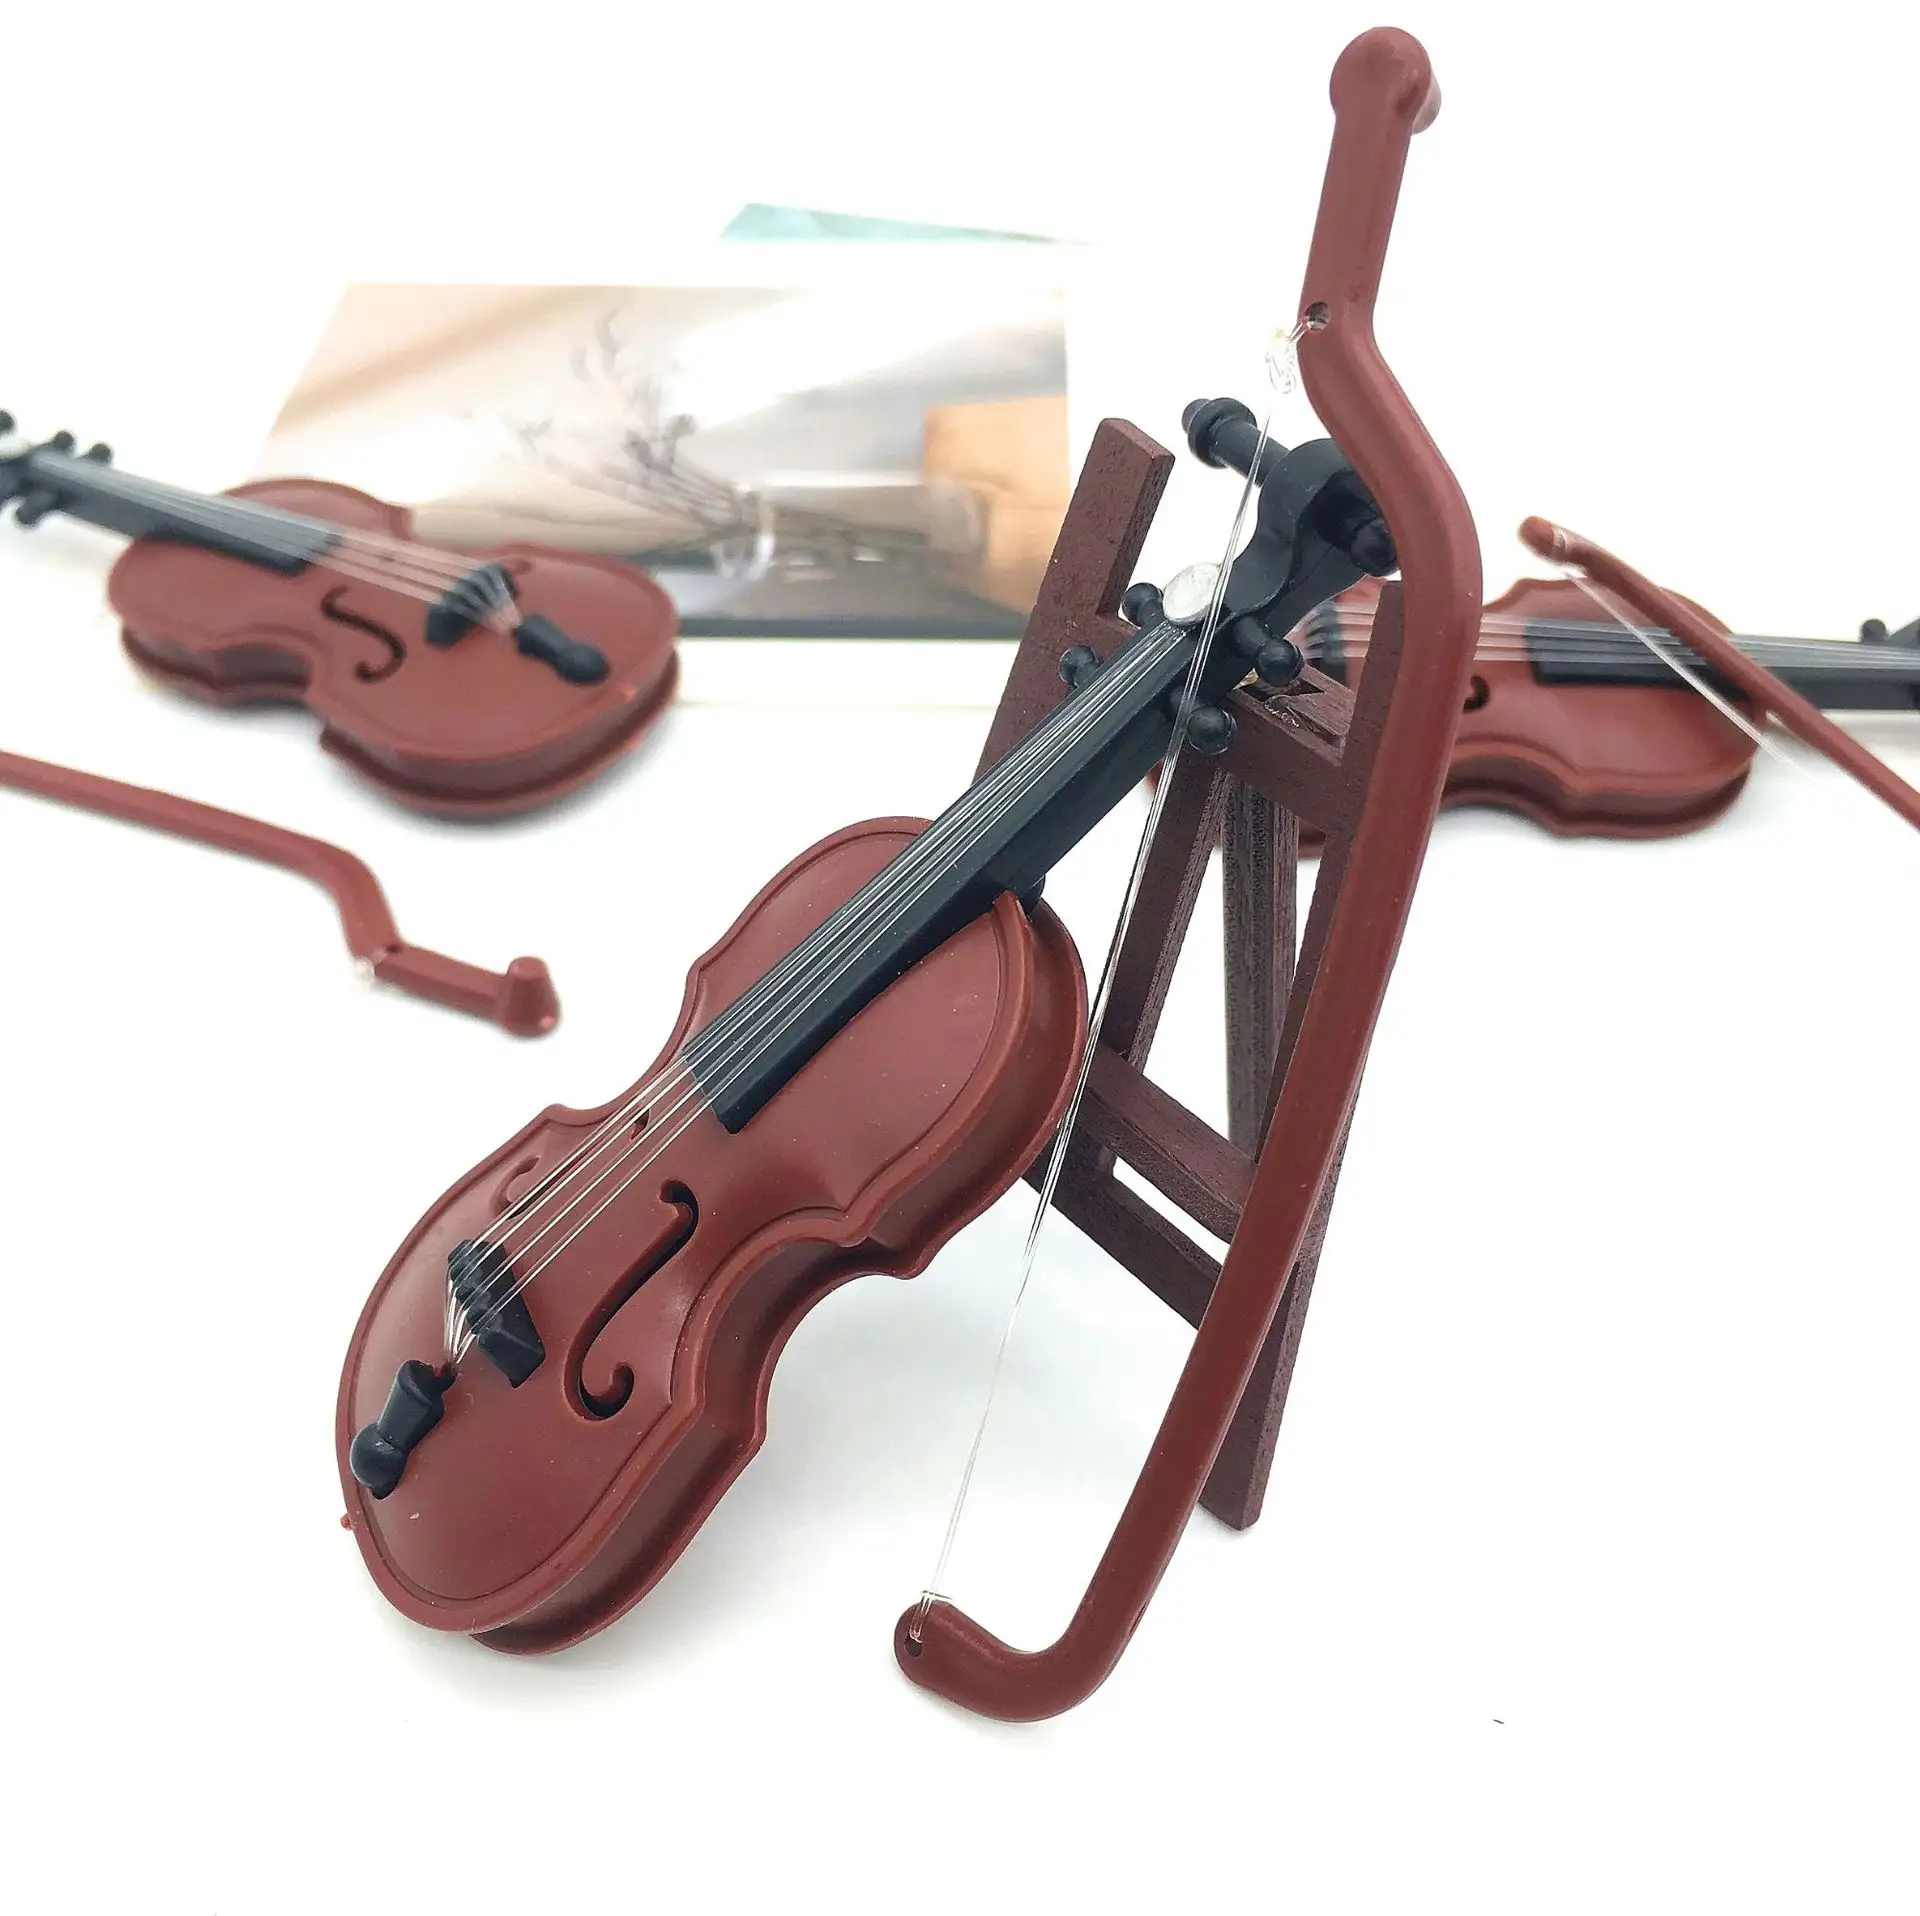 New Arrival Miniature Violin Mini Musical Instrument for Doll House Decoration